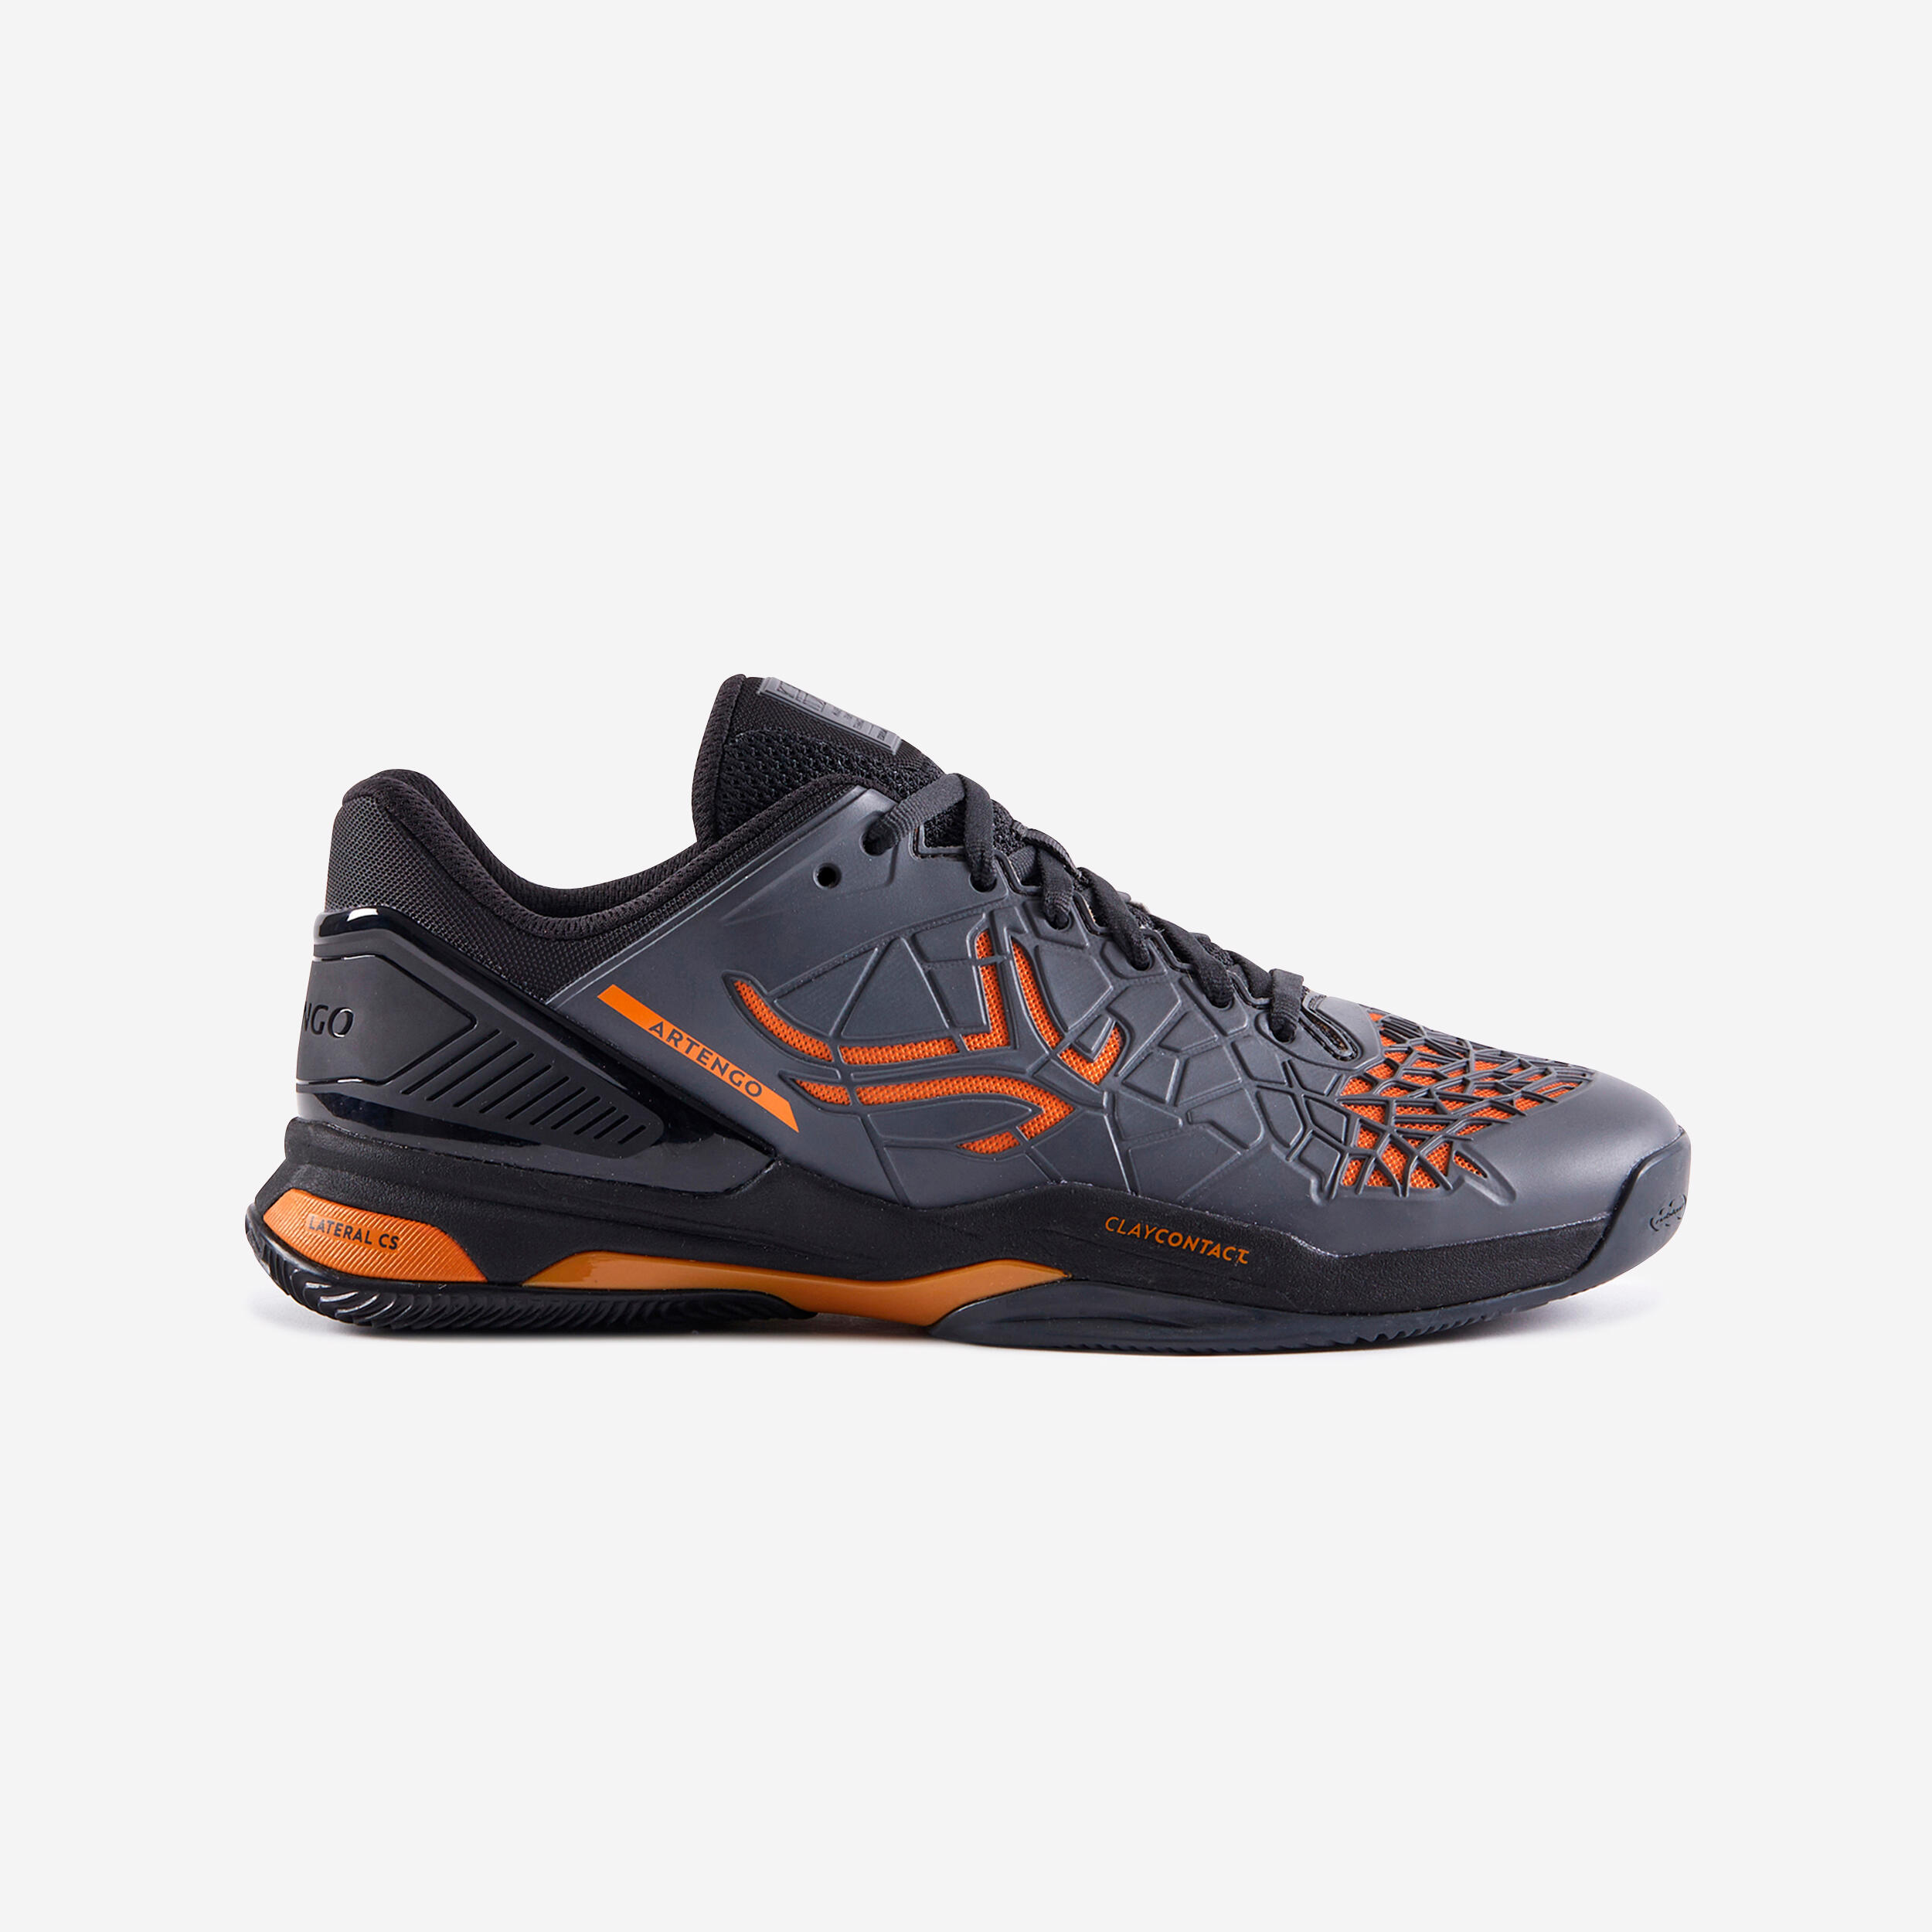 Men's Clay Court Tennis Shoes Strong Pro - Grey/Ochre 1/8